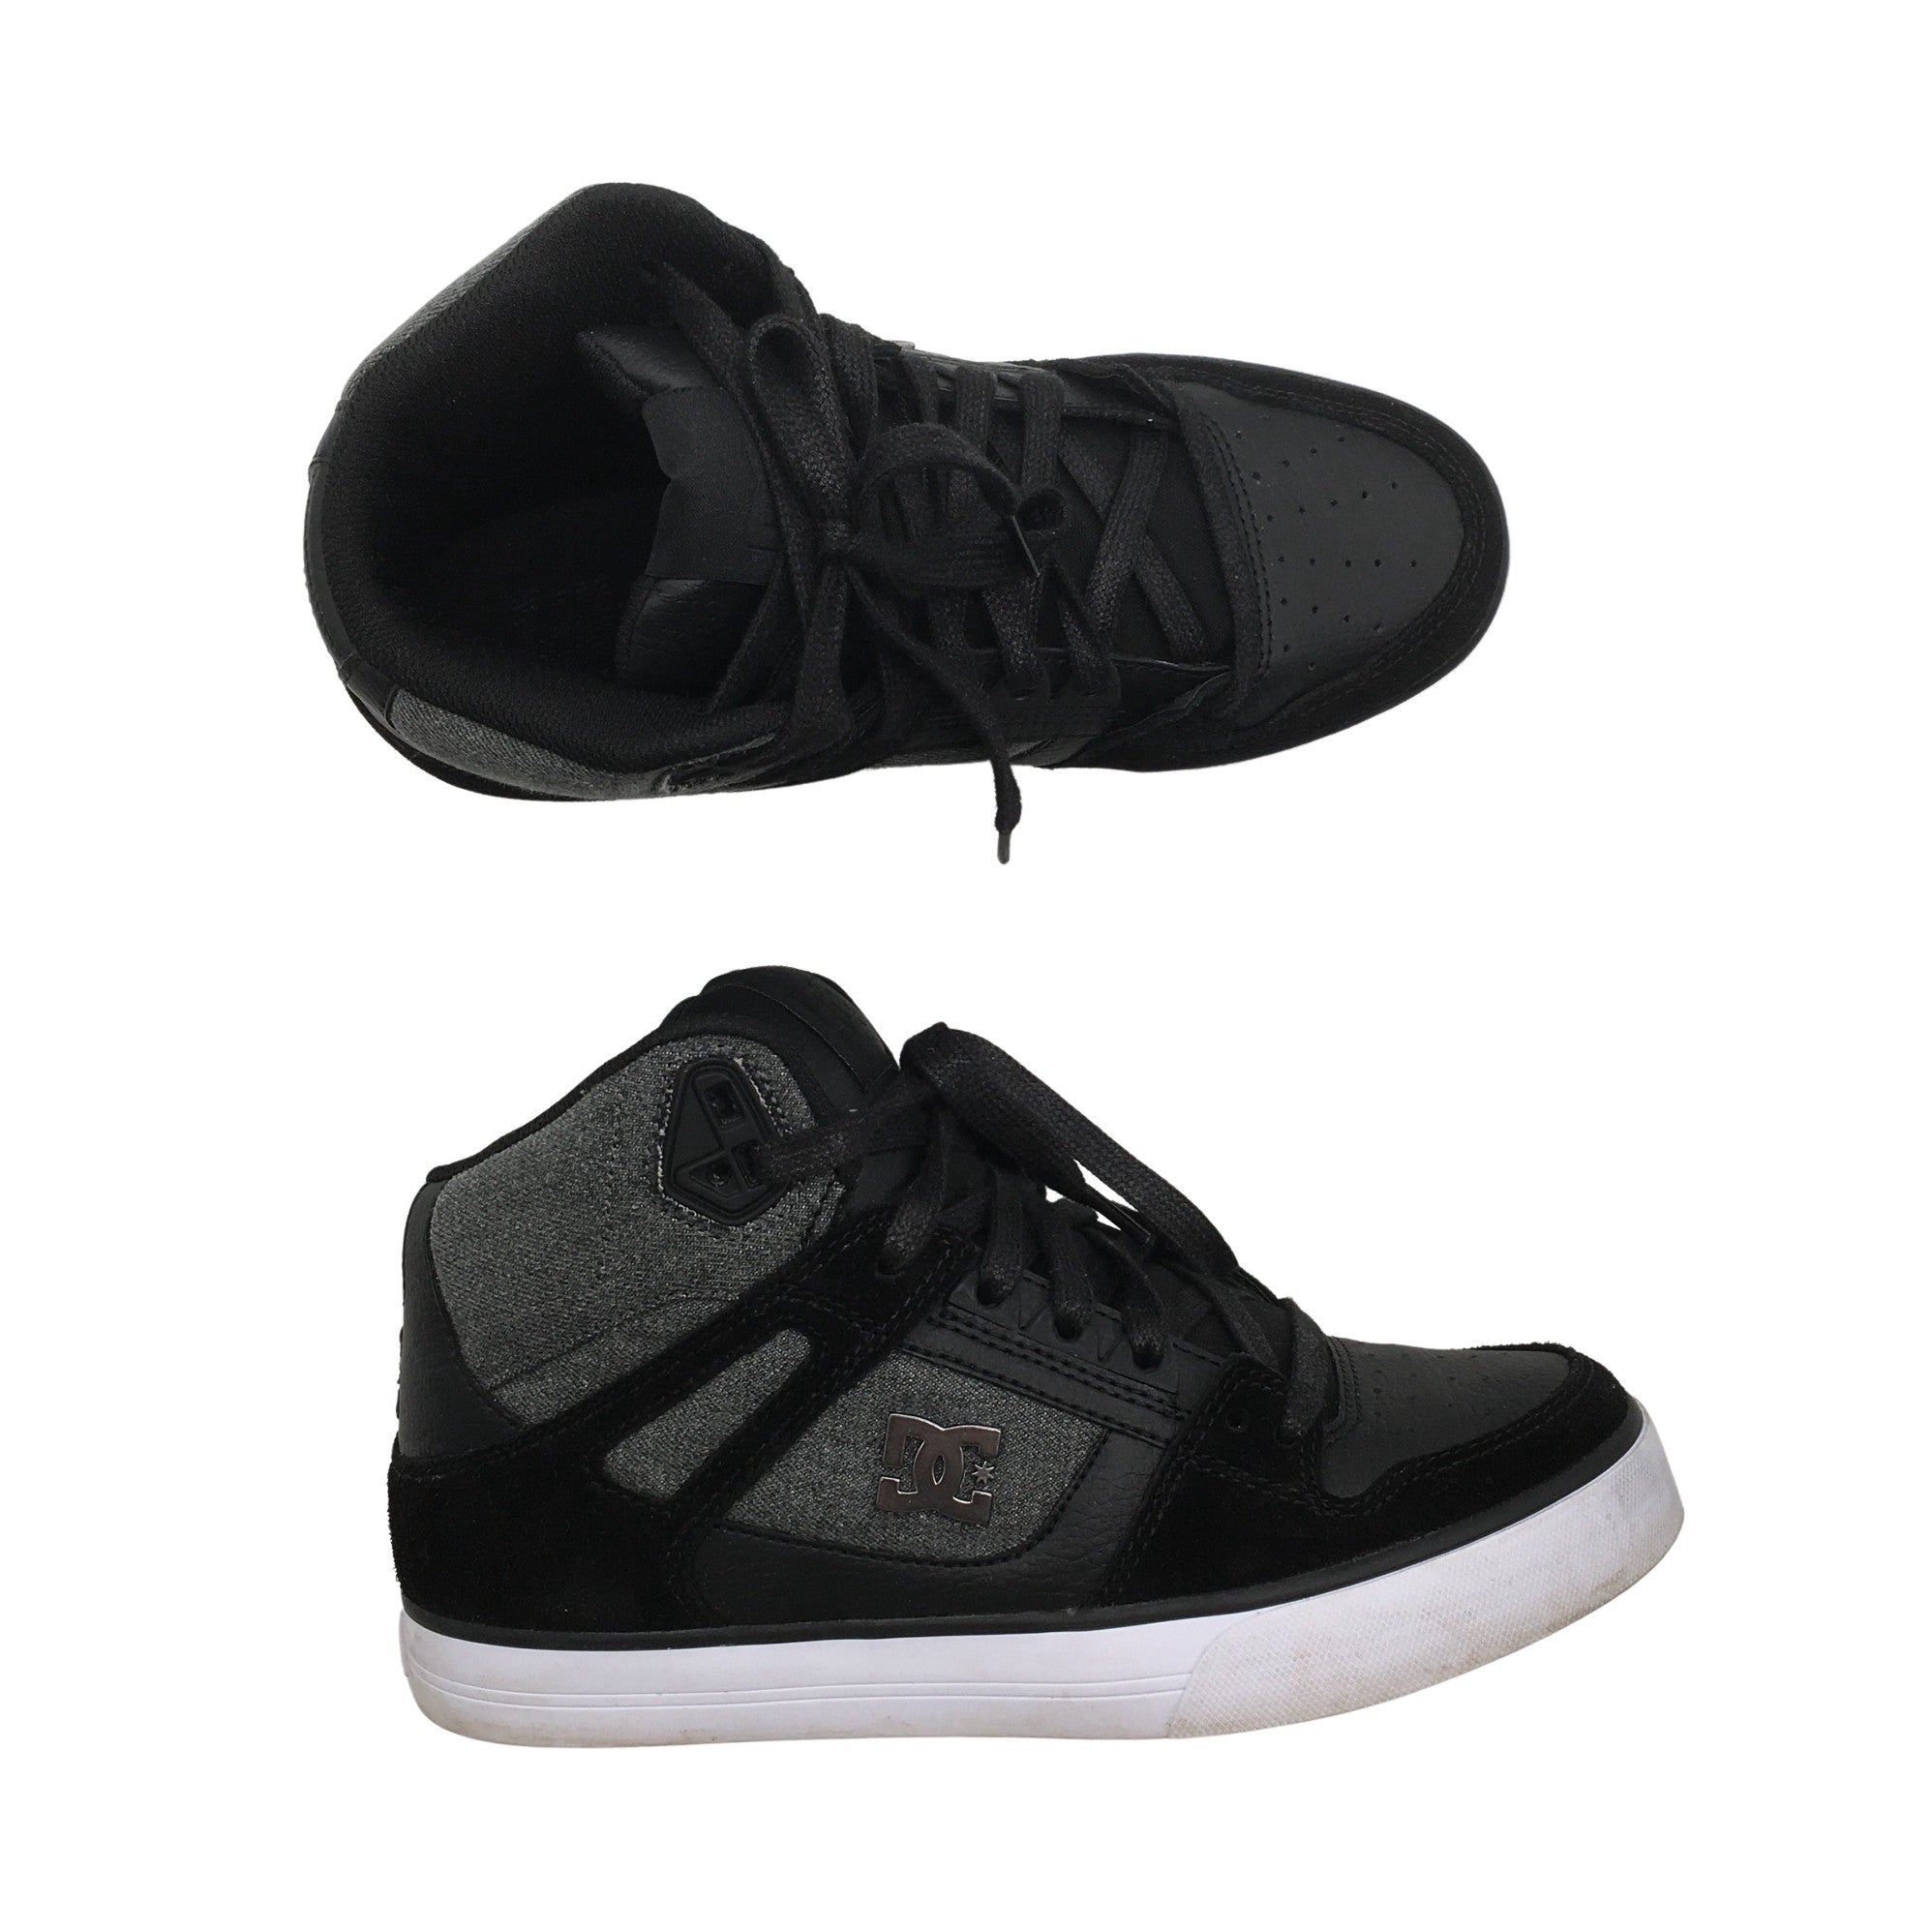 Men's DC Shoes Casual sneakers, size 39 (Black) | Emmy